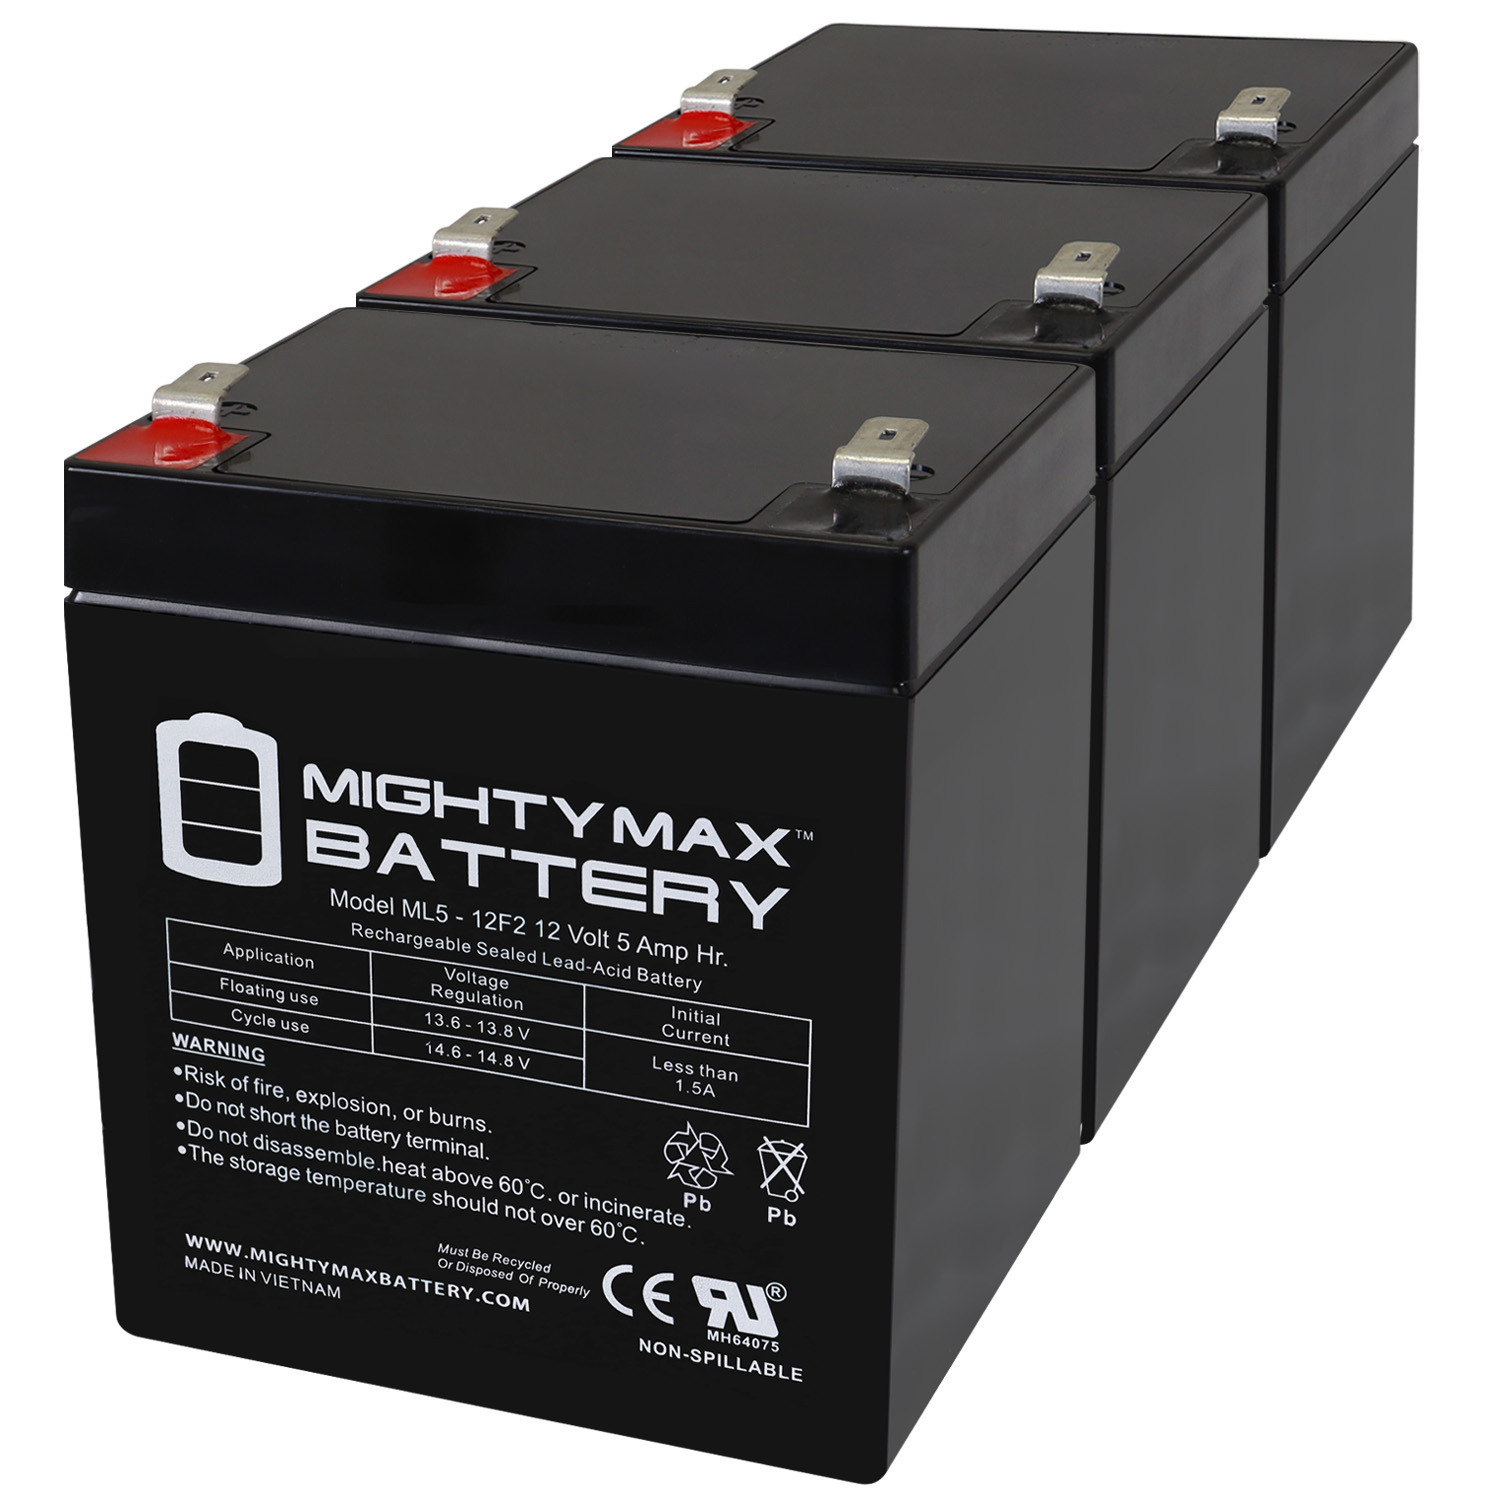 12V 5Ah F2 SLA Replacement Battery for E-Scooter 24 - 3 Pack